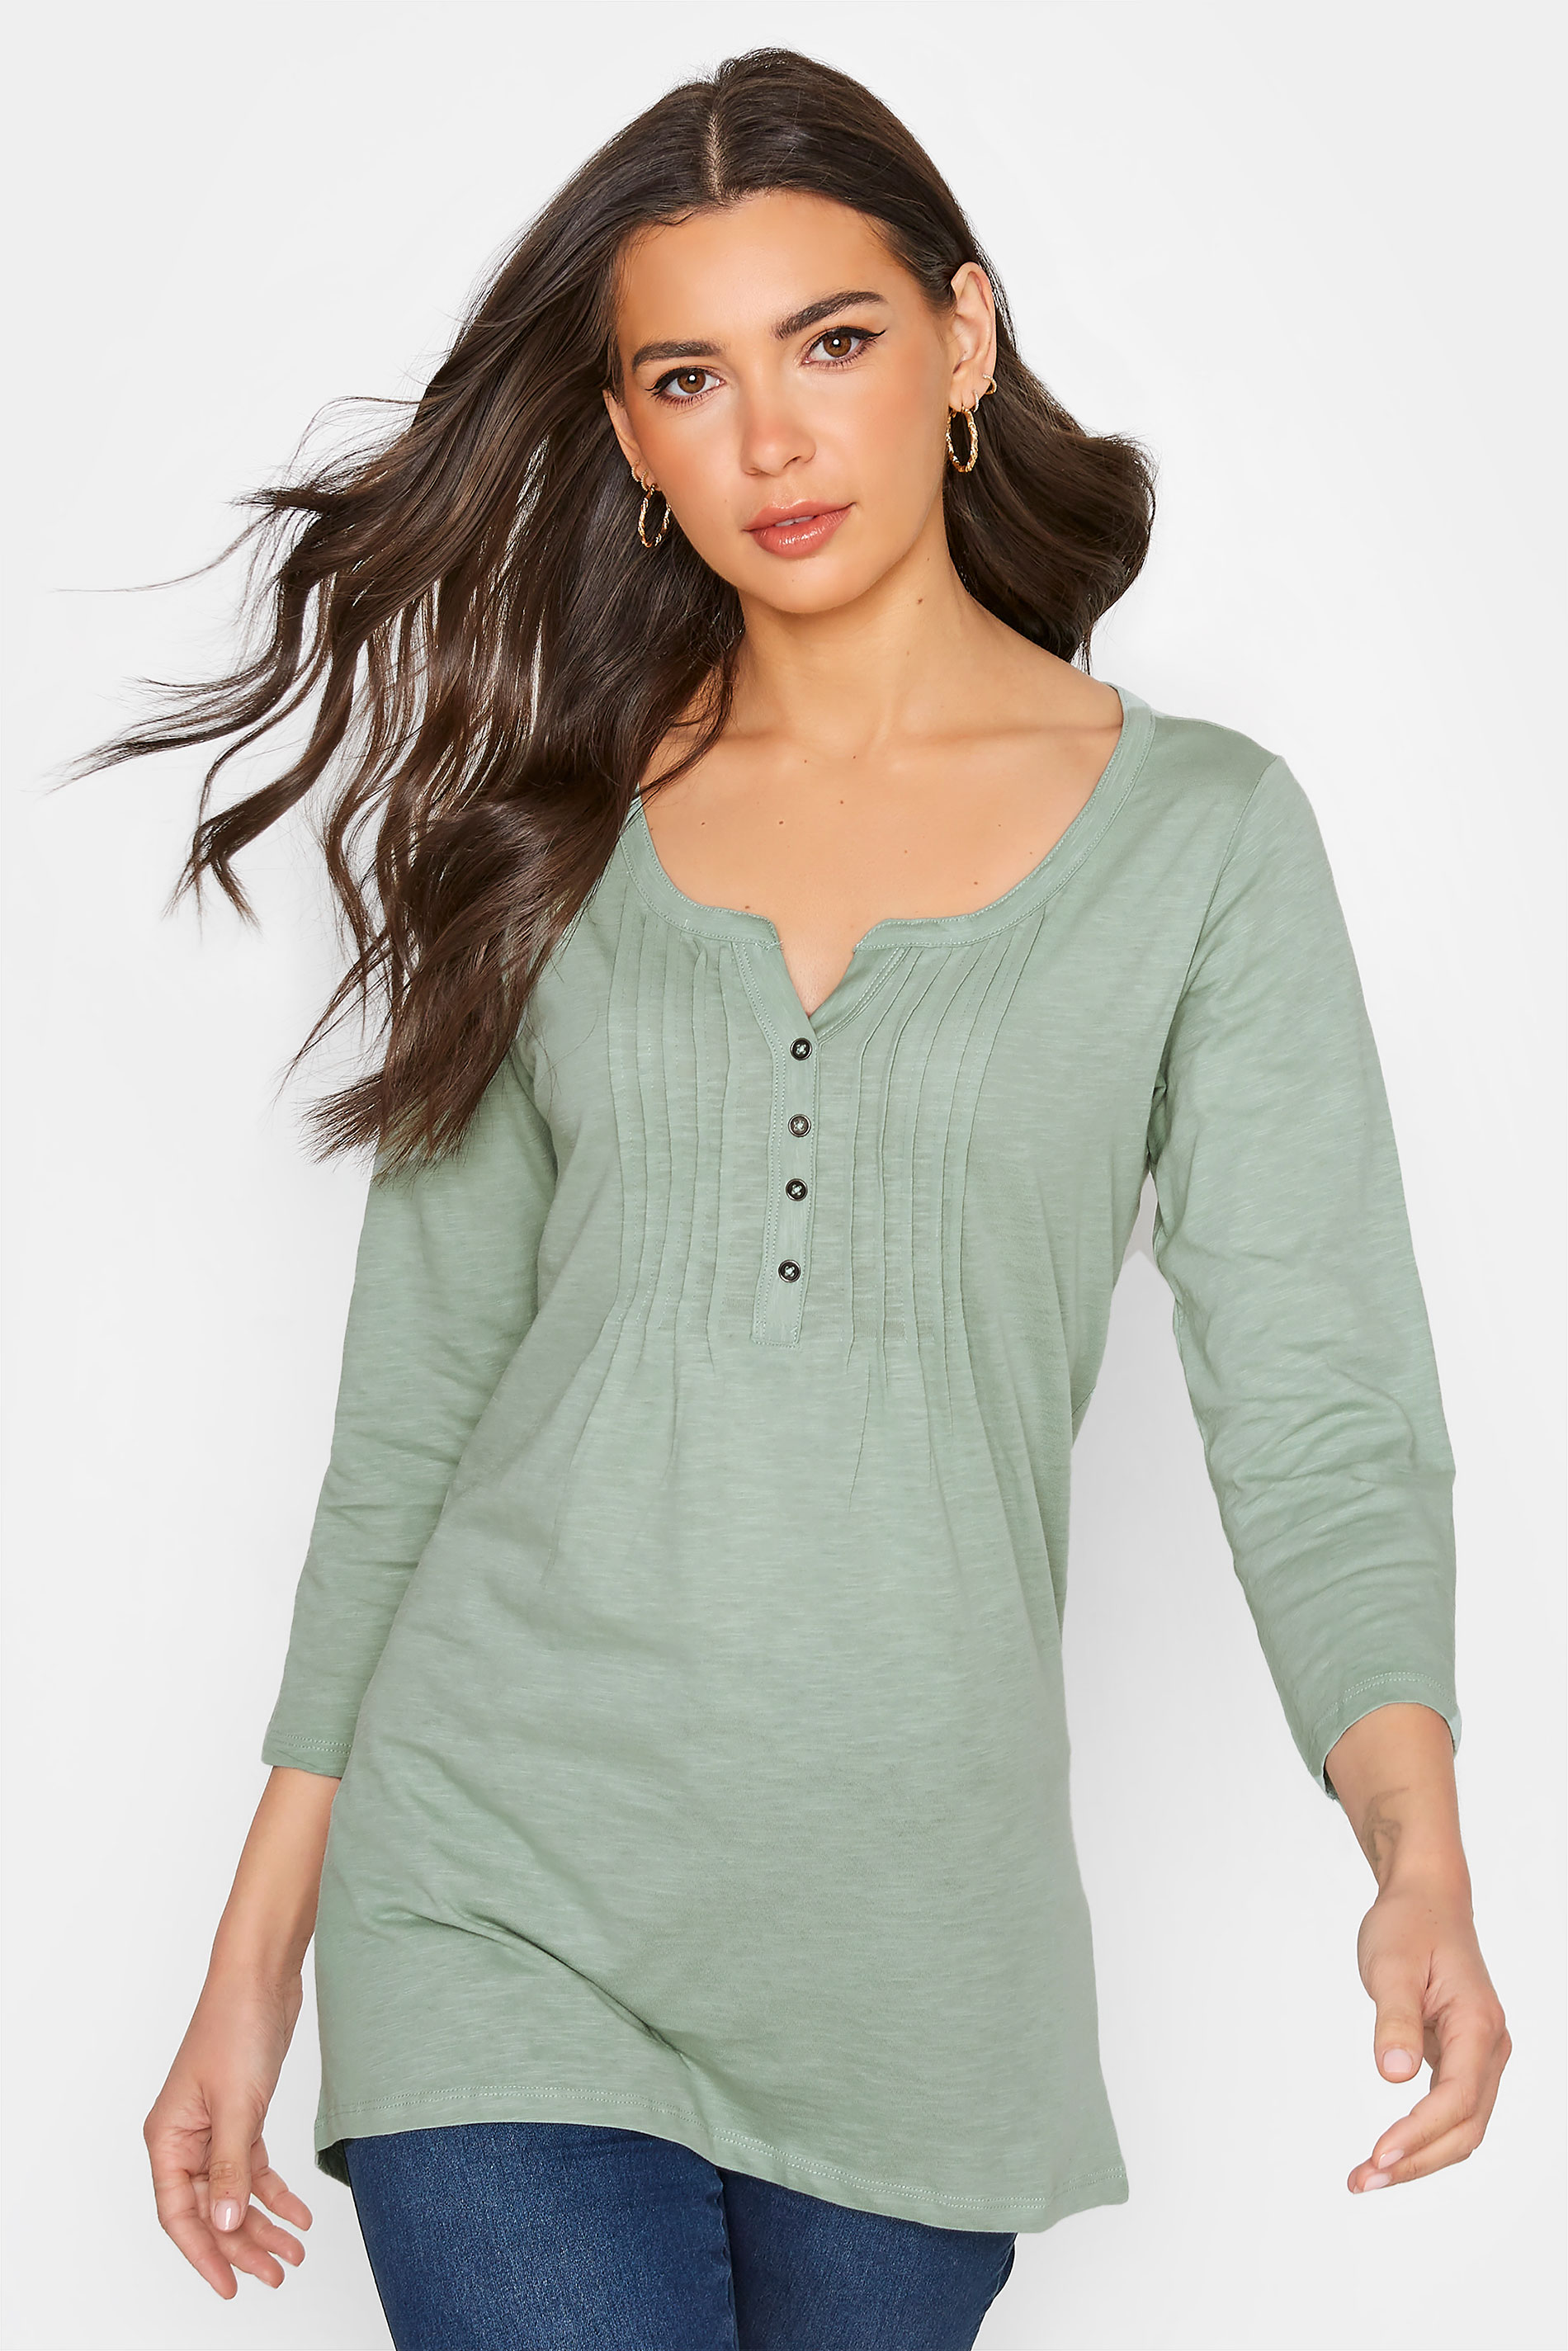 LTS MADE FOR GOOD Tall Sage Green Henley Top 1